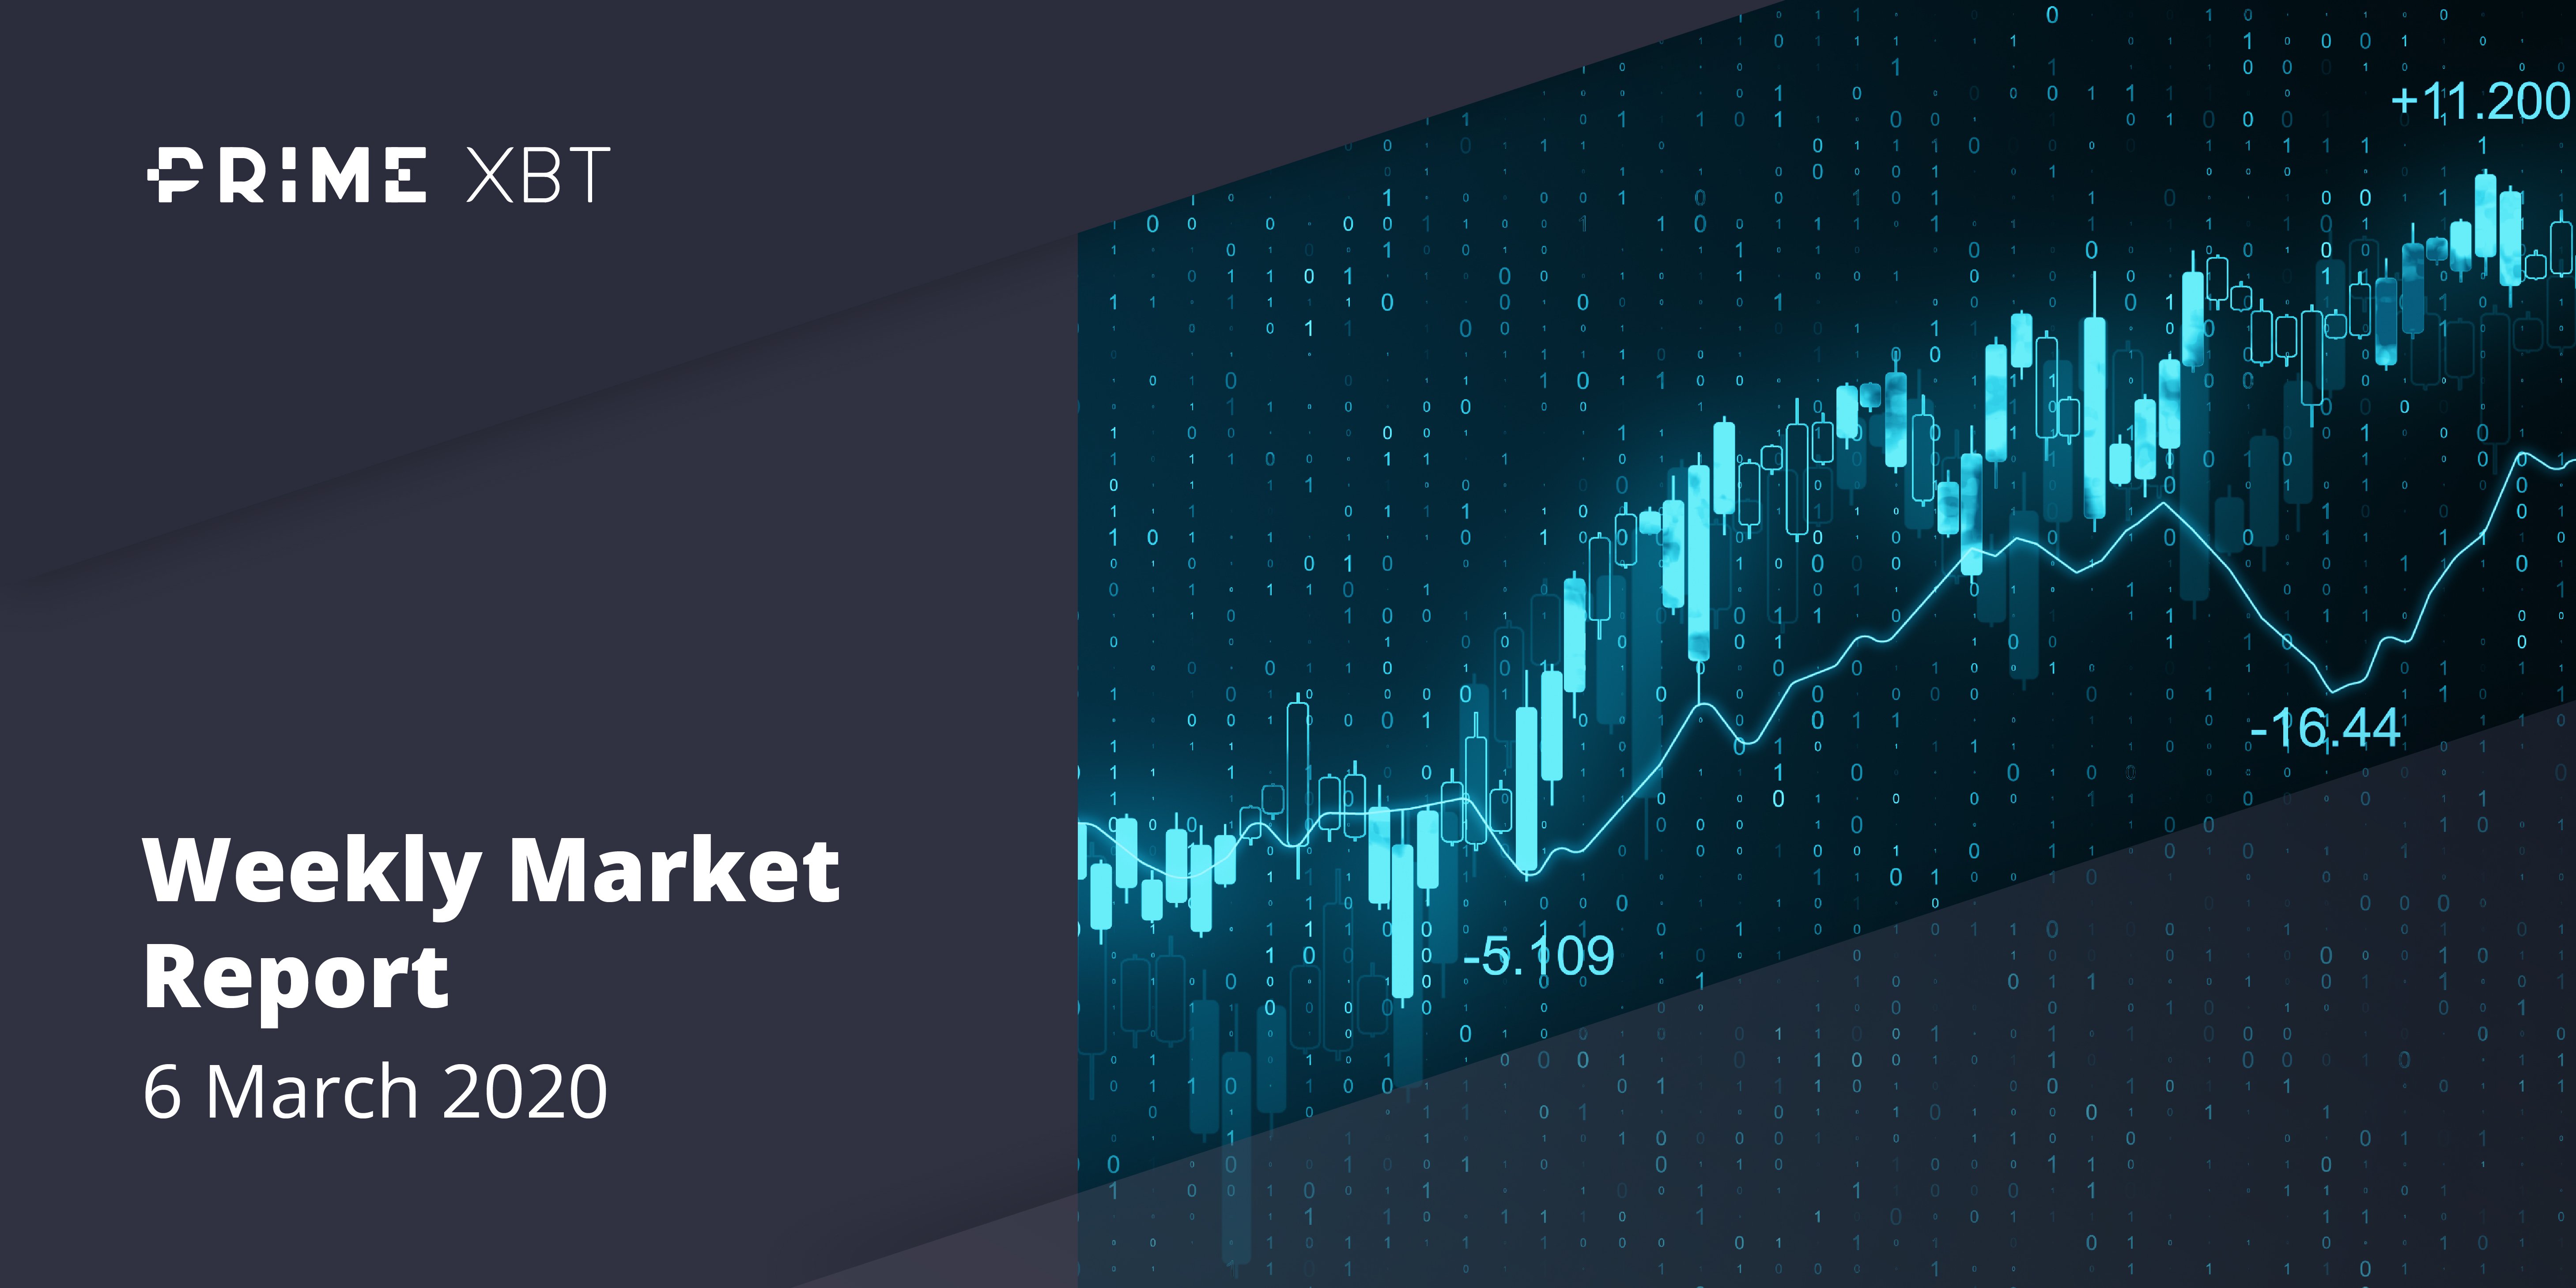 Crypto Market Report: Mixed week for Bitcoin Price but Support Level Held, BTC ATMs climbing as is Institutional Futures Interest - 2020 03 06 20.50.45